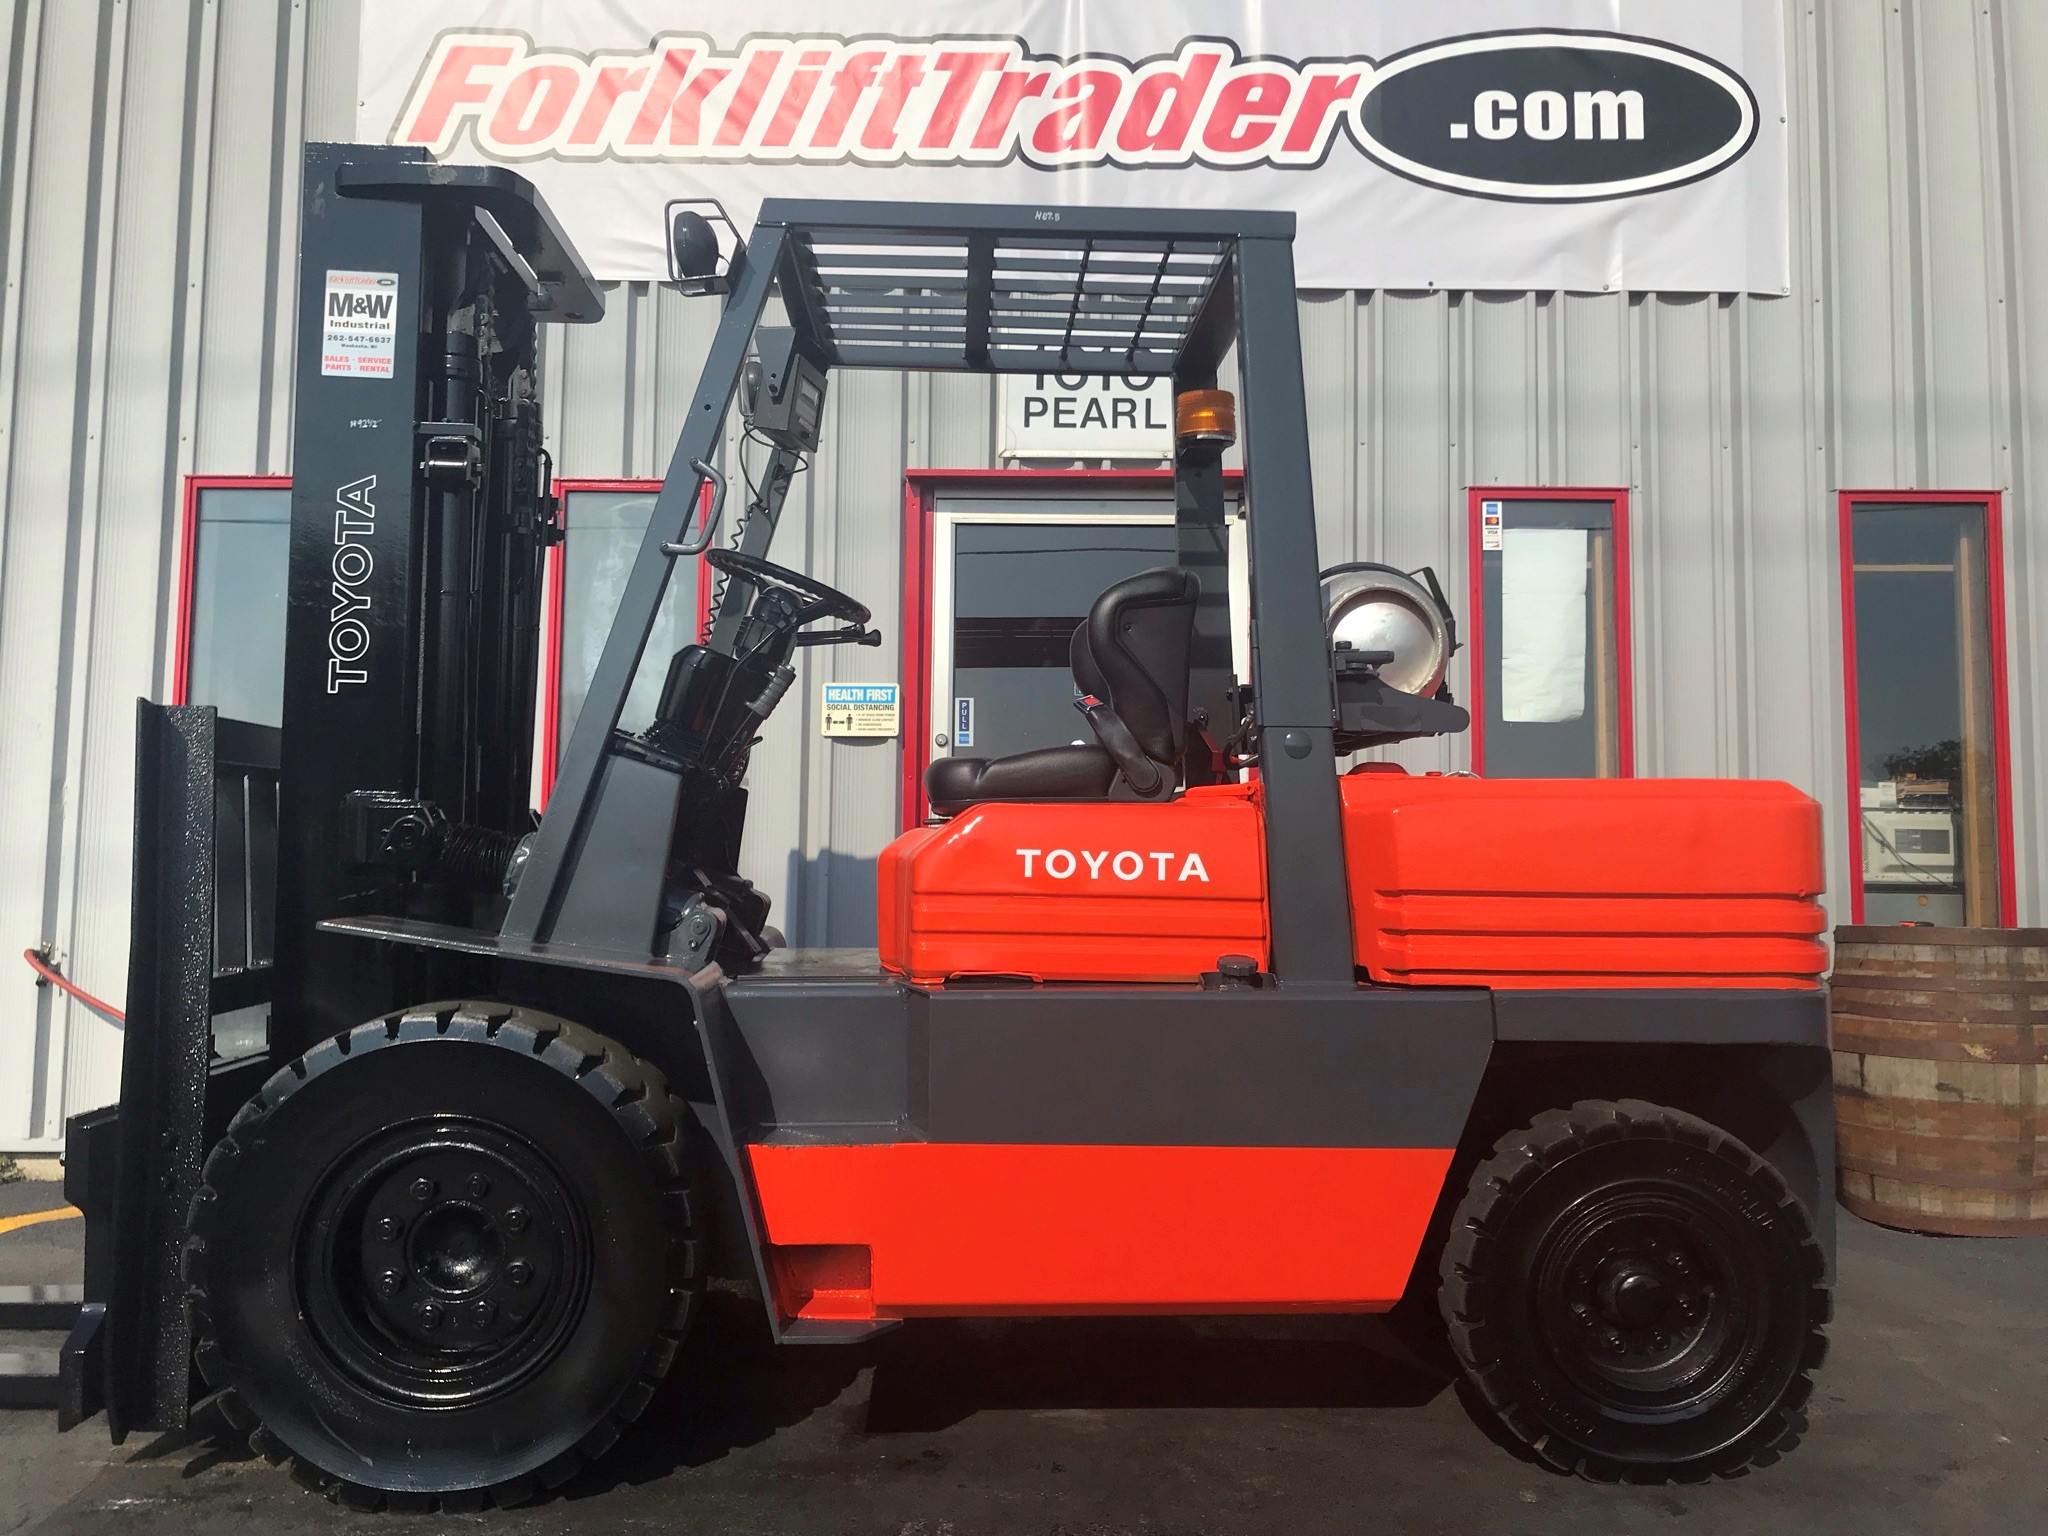 L.P. Gas 1997 toyota forklift for sale